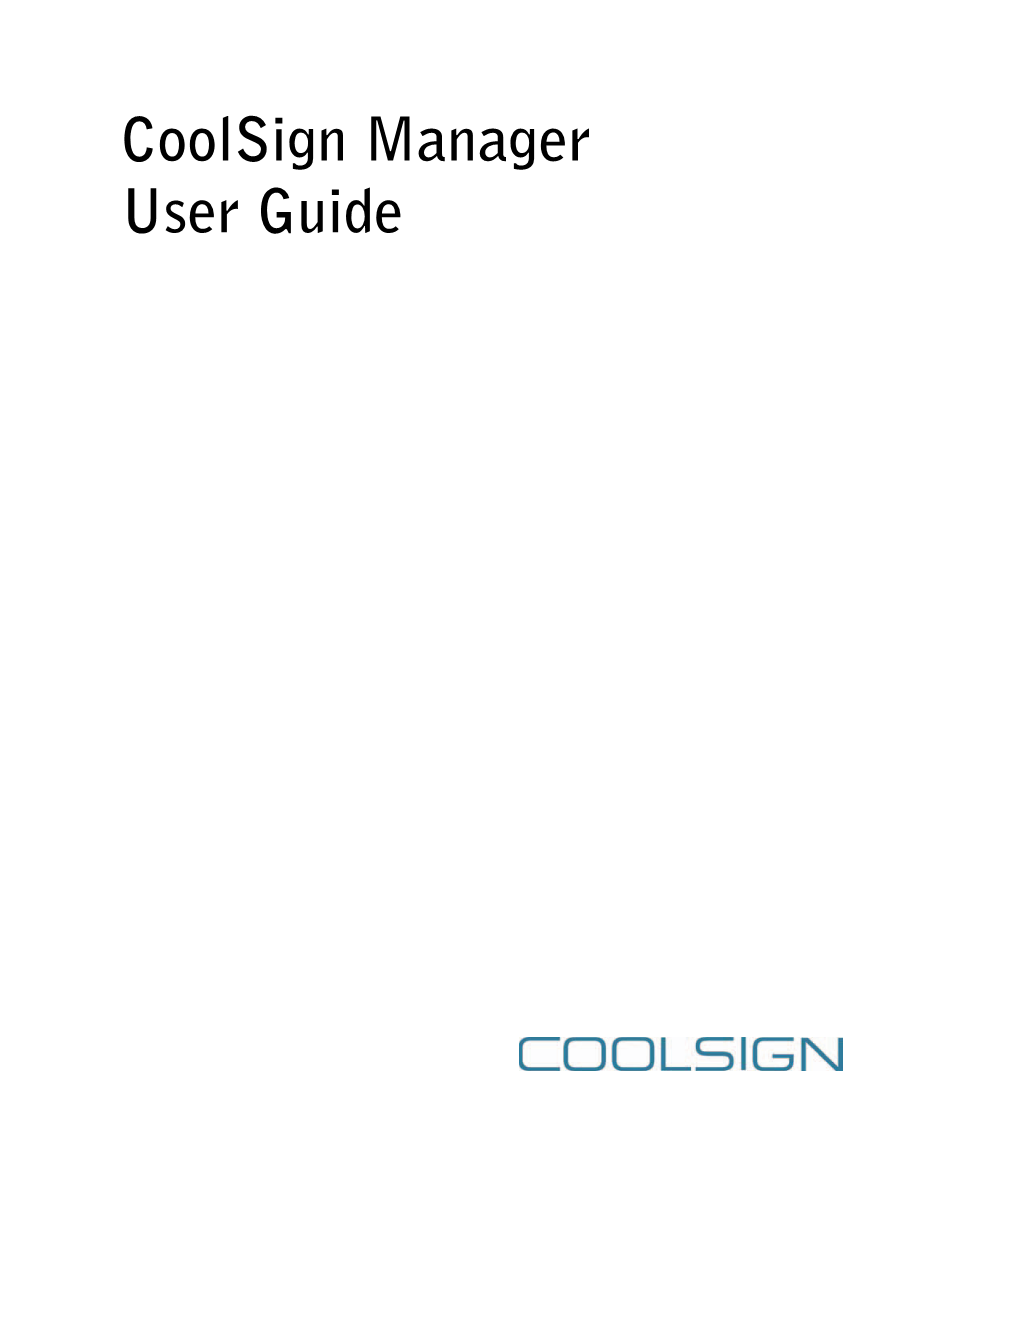 Coolsign Manager User Guide Copyright Copyright © 2006-2010 All Rights Reserved